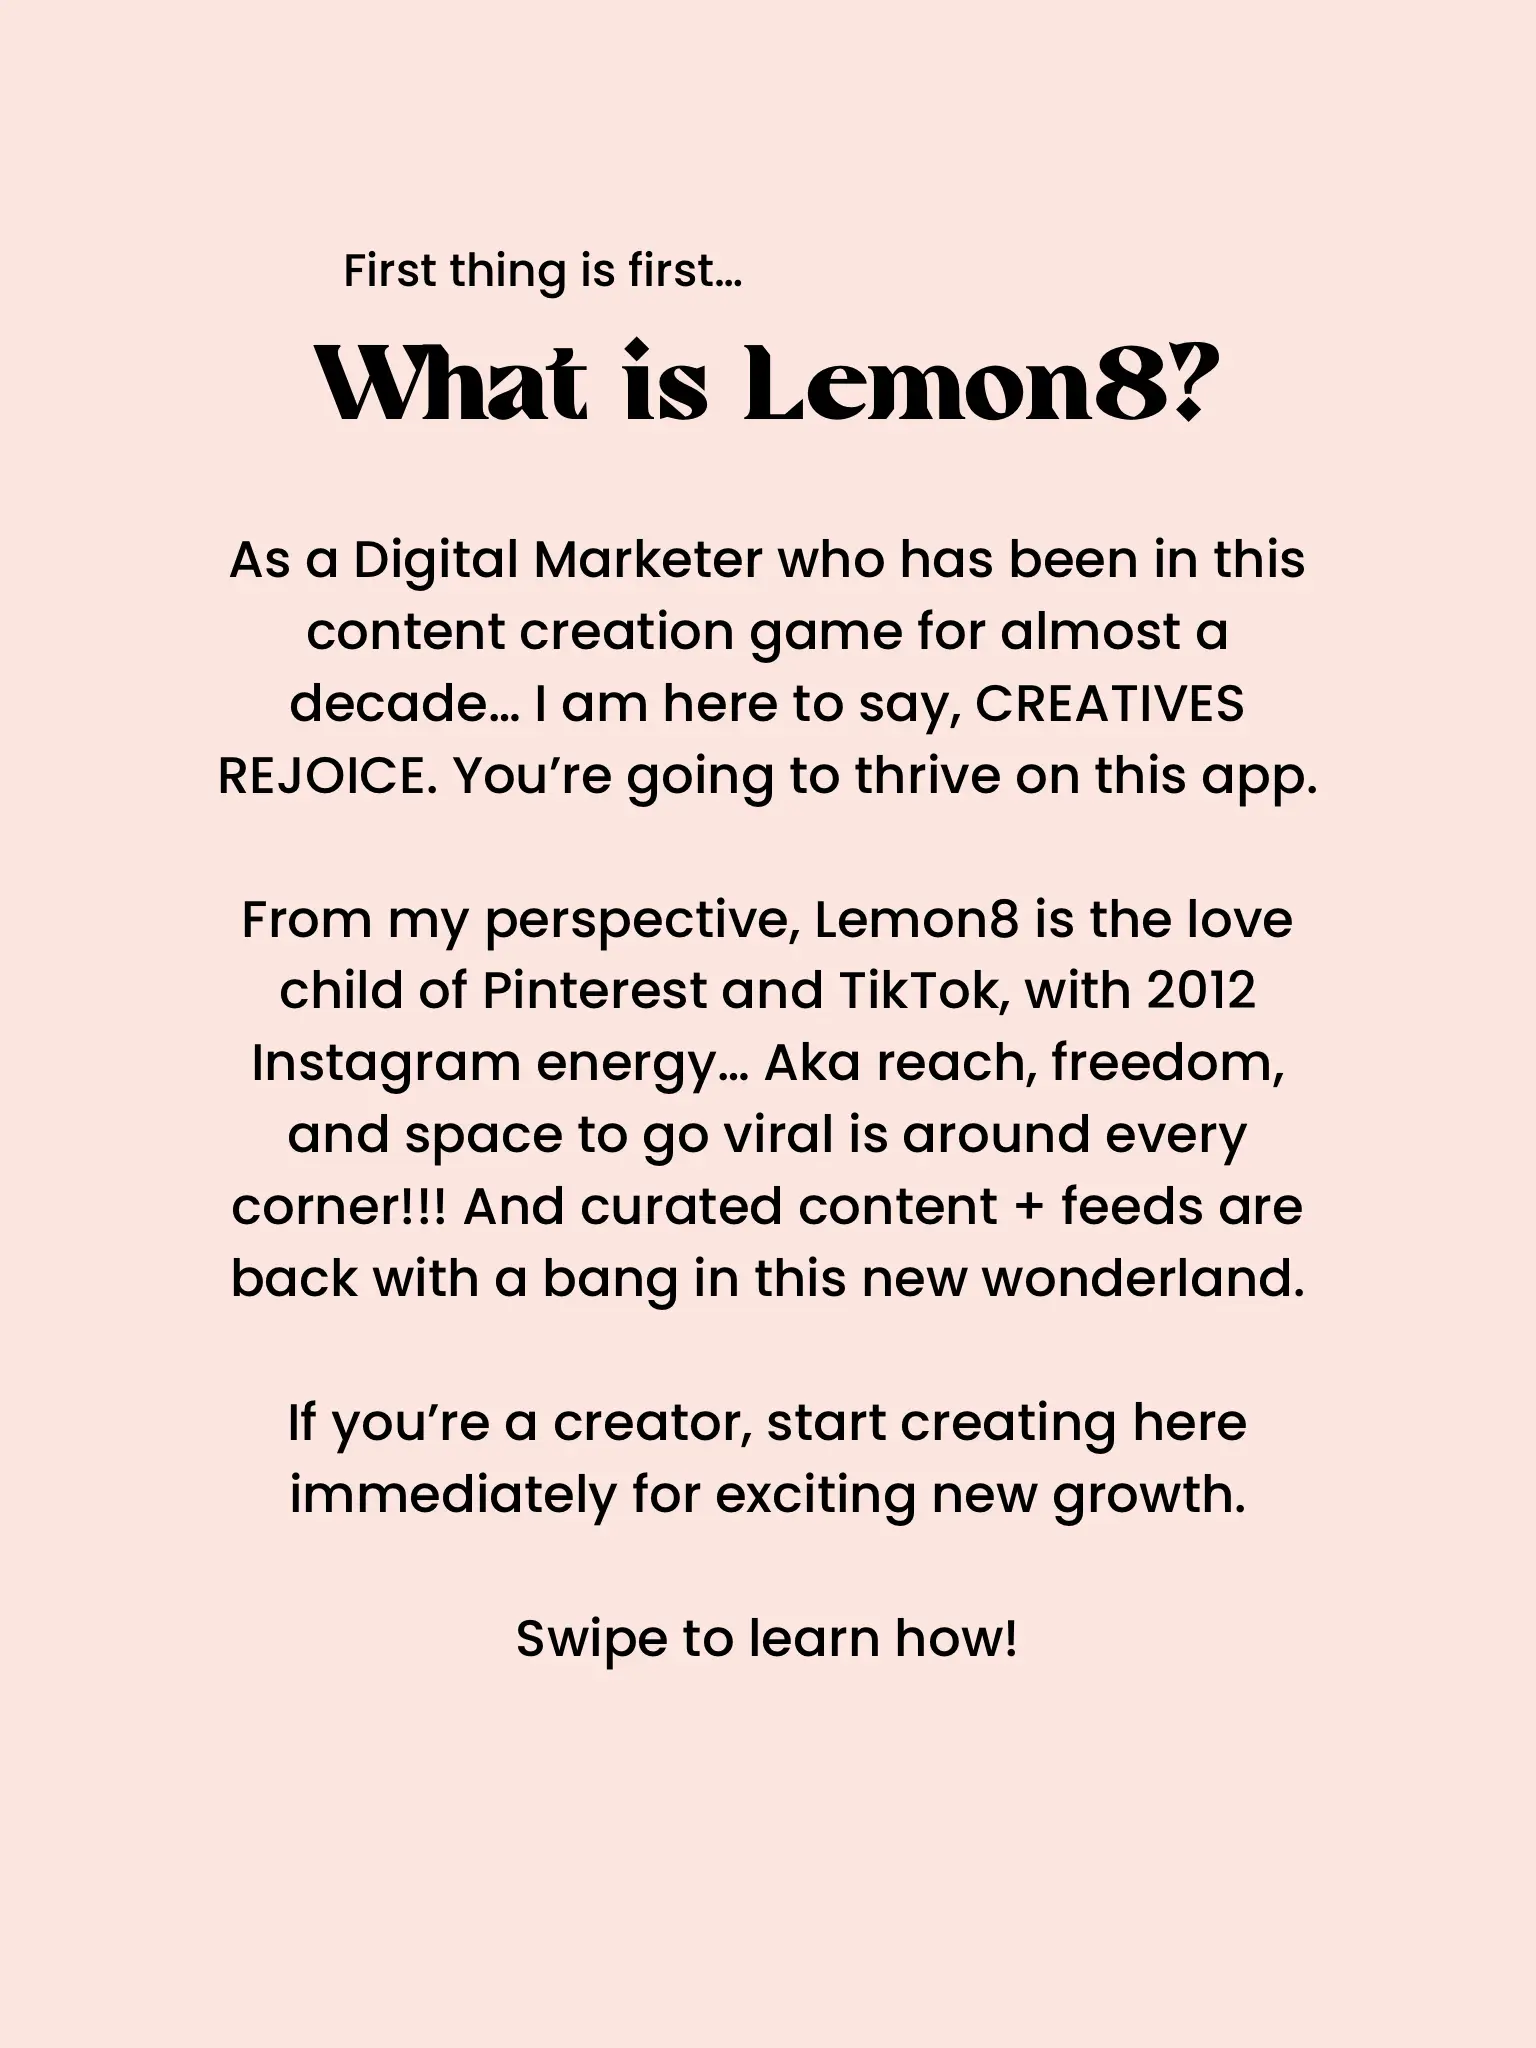  A white background with a text that says "From my perspective, Lemon8 is the love child of Pinterest and TikTok, with 2012 Instagram energy. Aka reach, freedom, and space to go viral is around every corner!!! And curated content + feeds are back with a bang in this new wonderland. If you're a creator, start creating here immediately for exciting new growth."